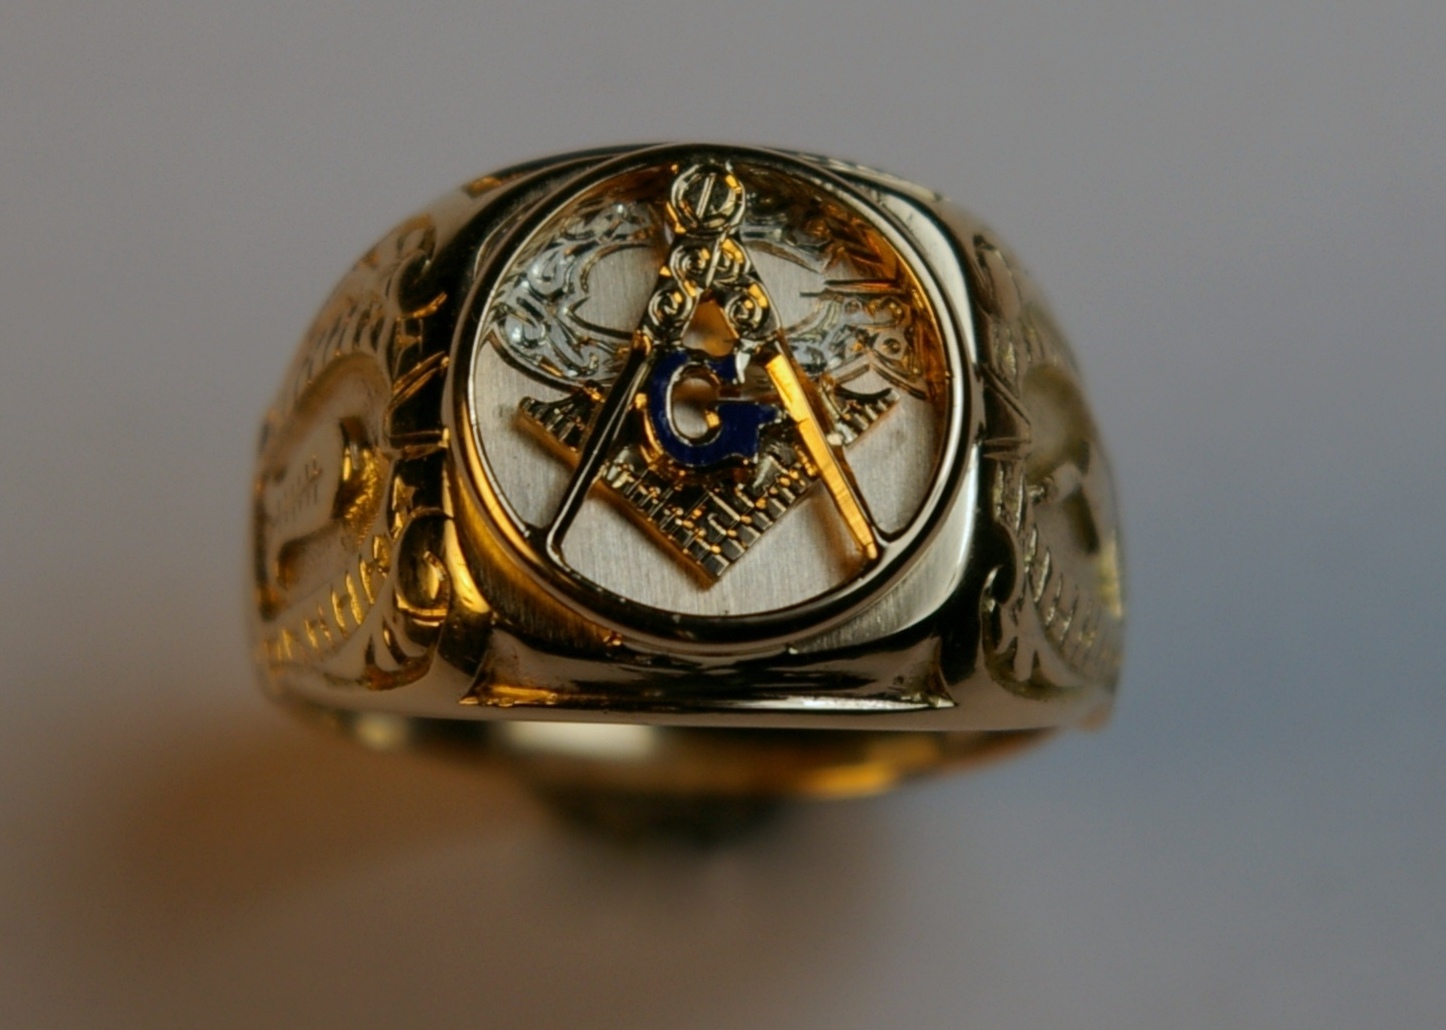 The Masonic ring after restoration at Crane Jewelers Seattle